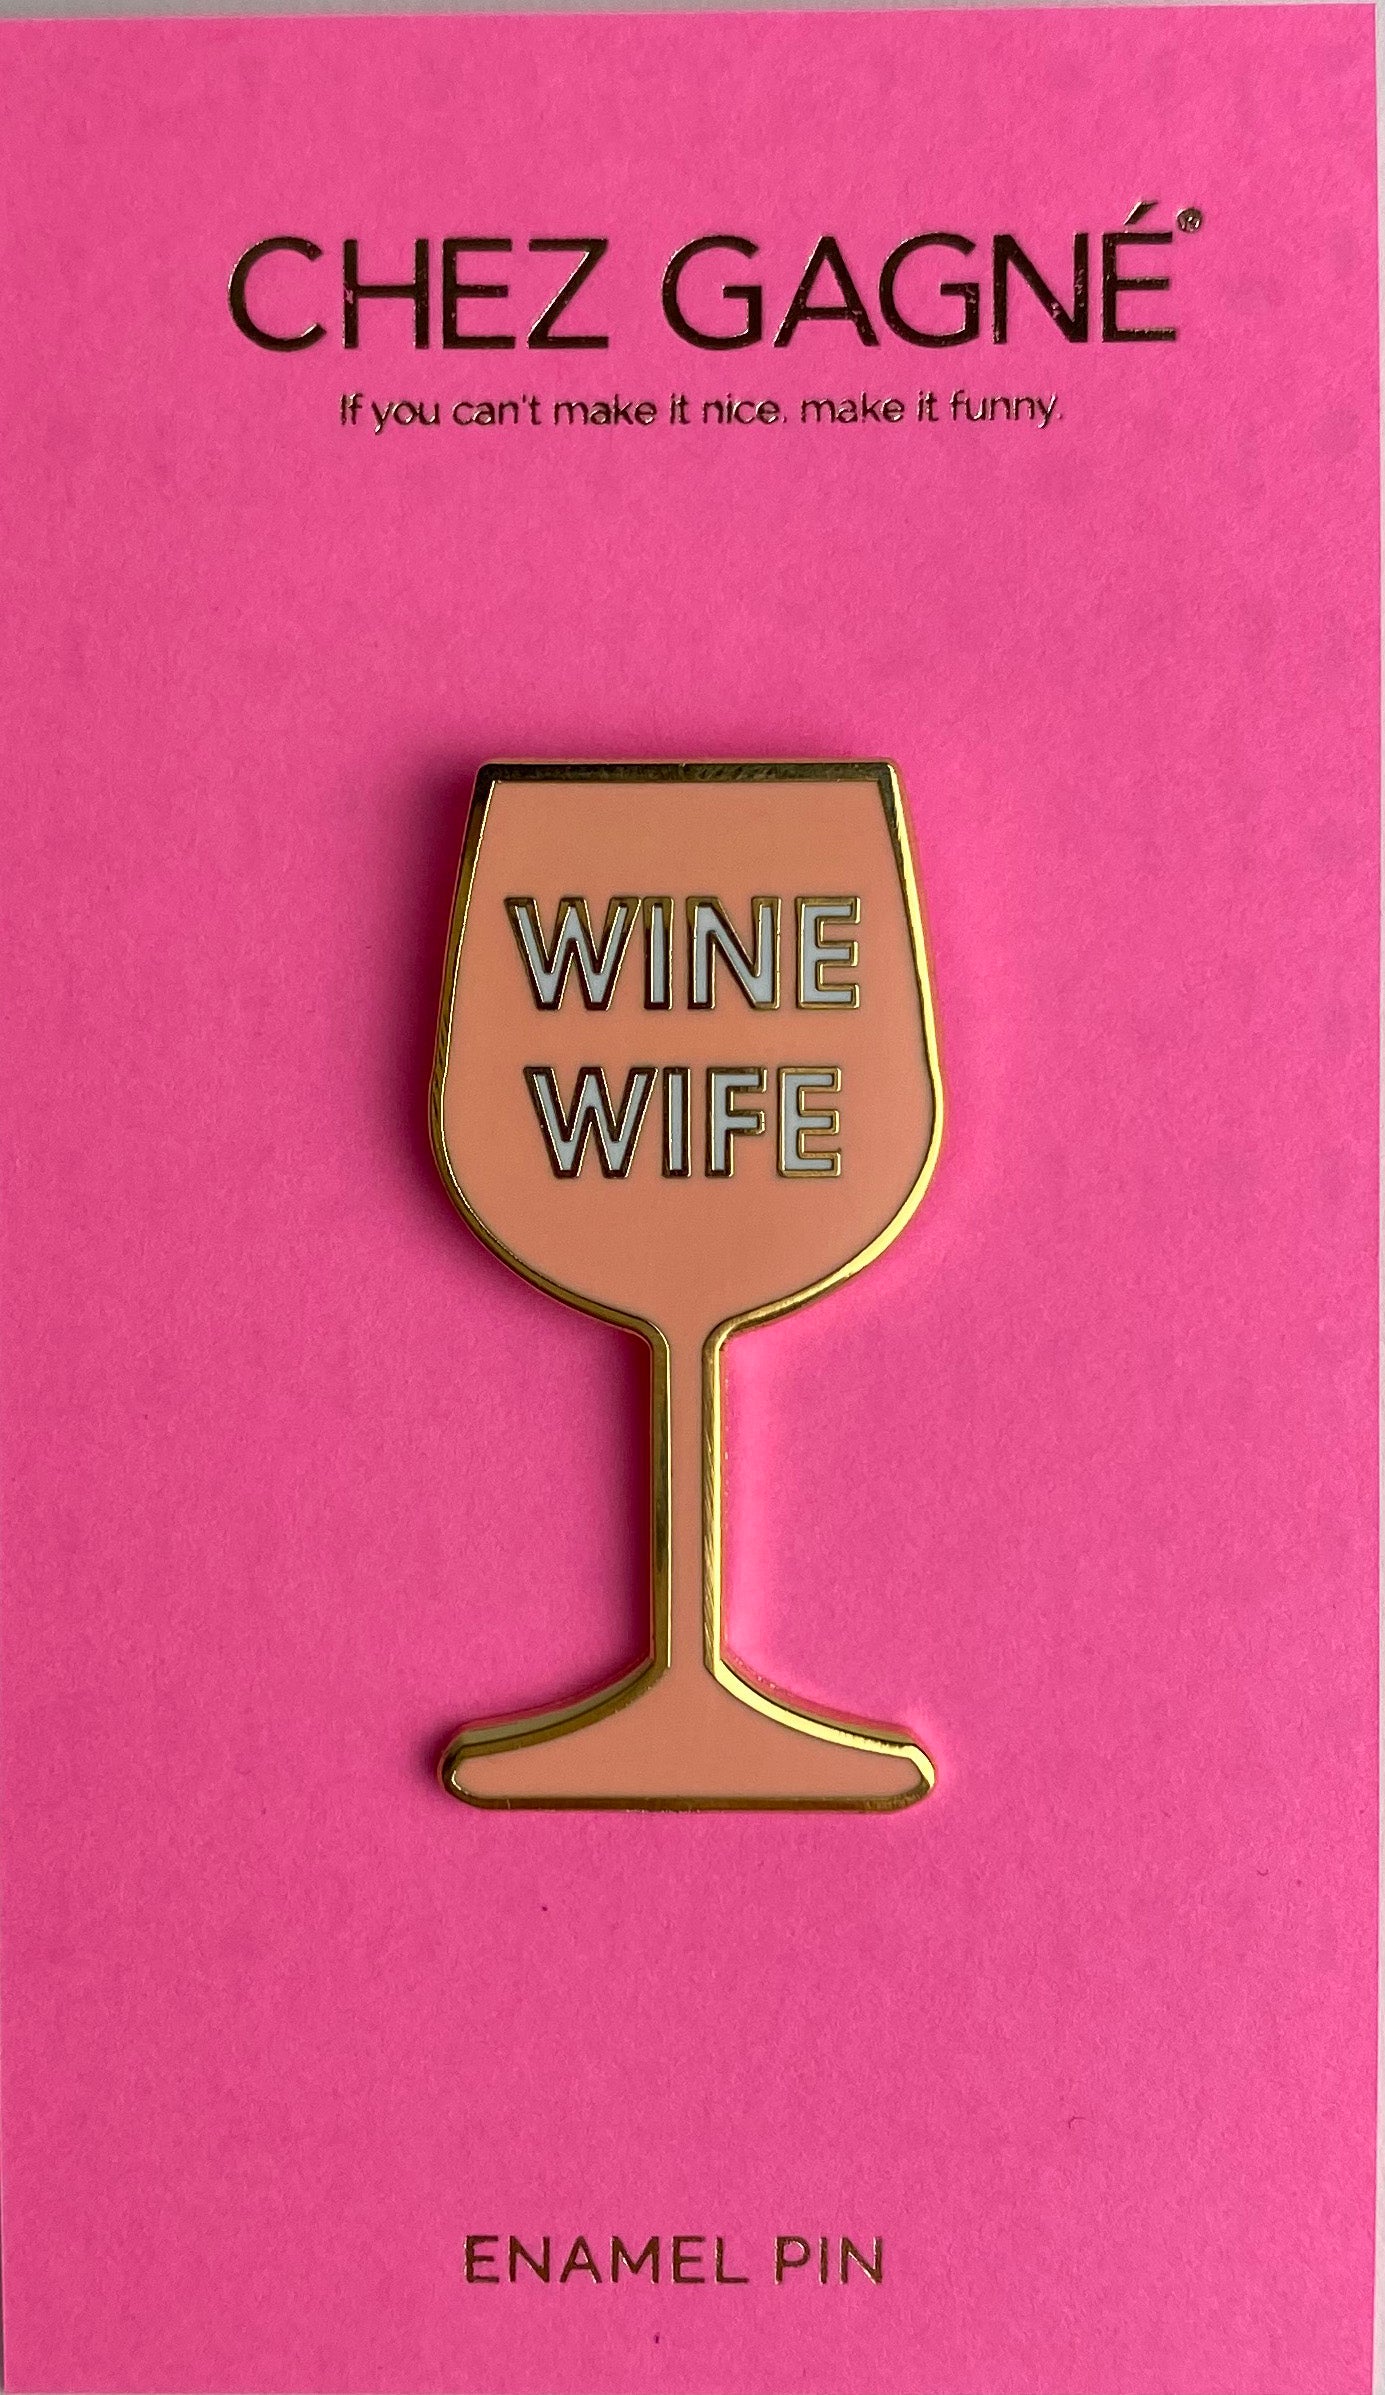 Our Wine Wife hilarious enamel pin is perfect for your bestie, sister or other wine wife in your life! Chez Gagne Hard Enamel Pin. Wine lover gift. Wine lover enamel pin.